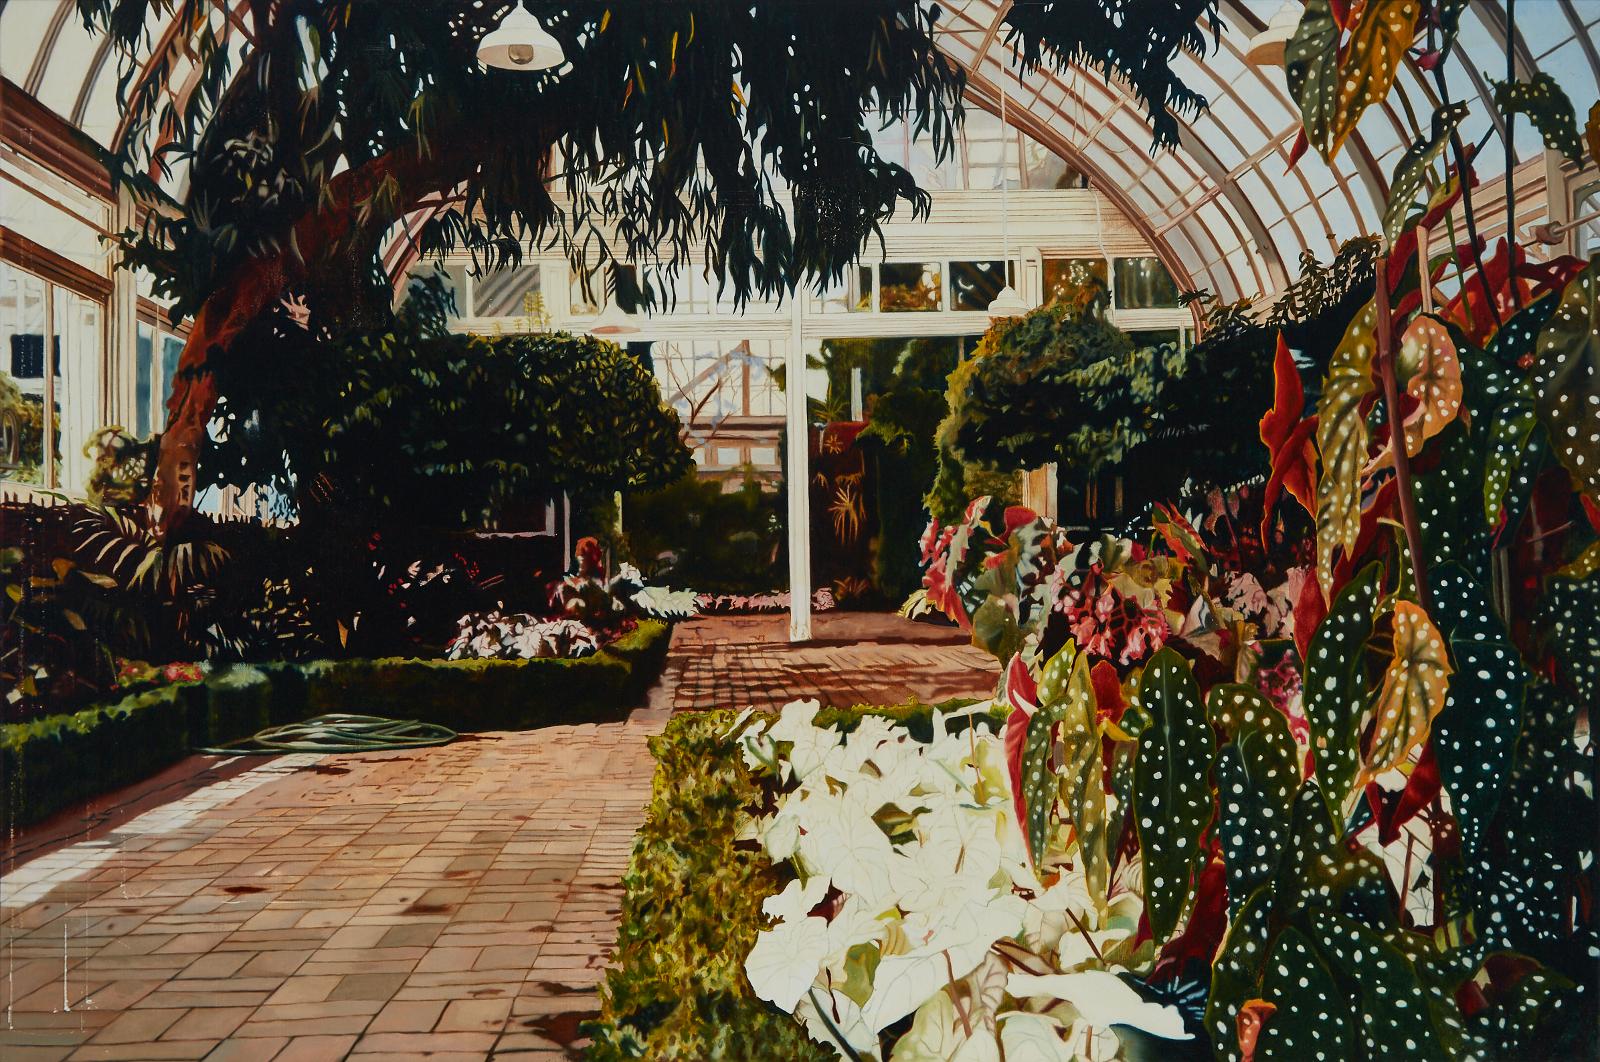 Marcella S. Nelson (1955) - The Conservatory, 1989